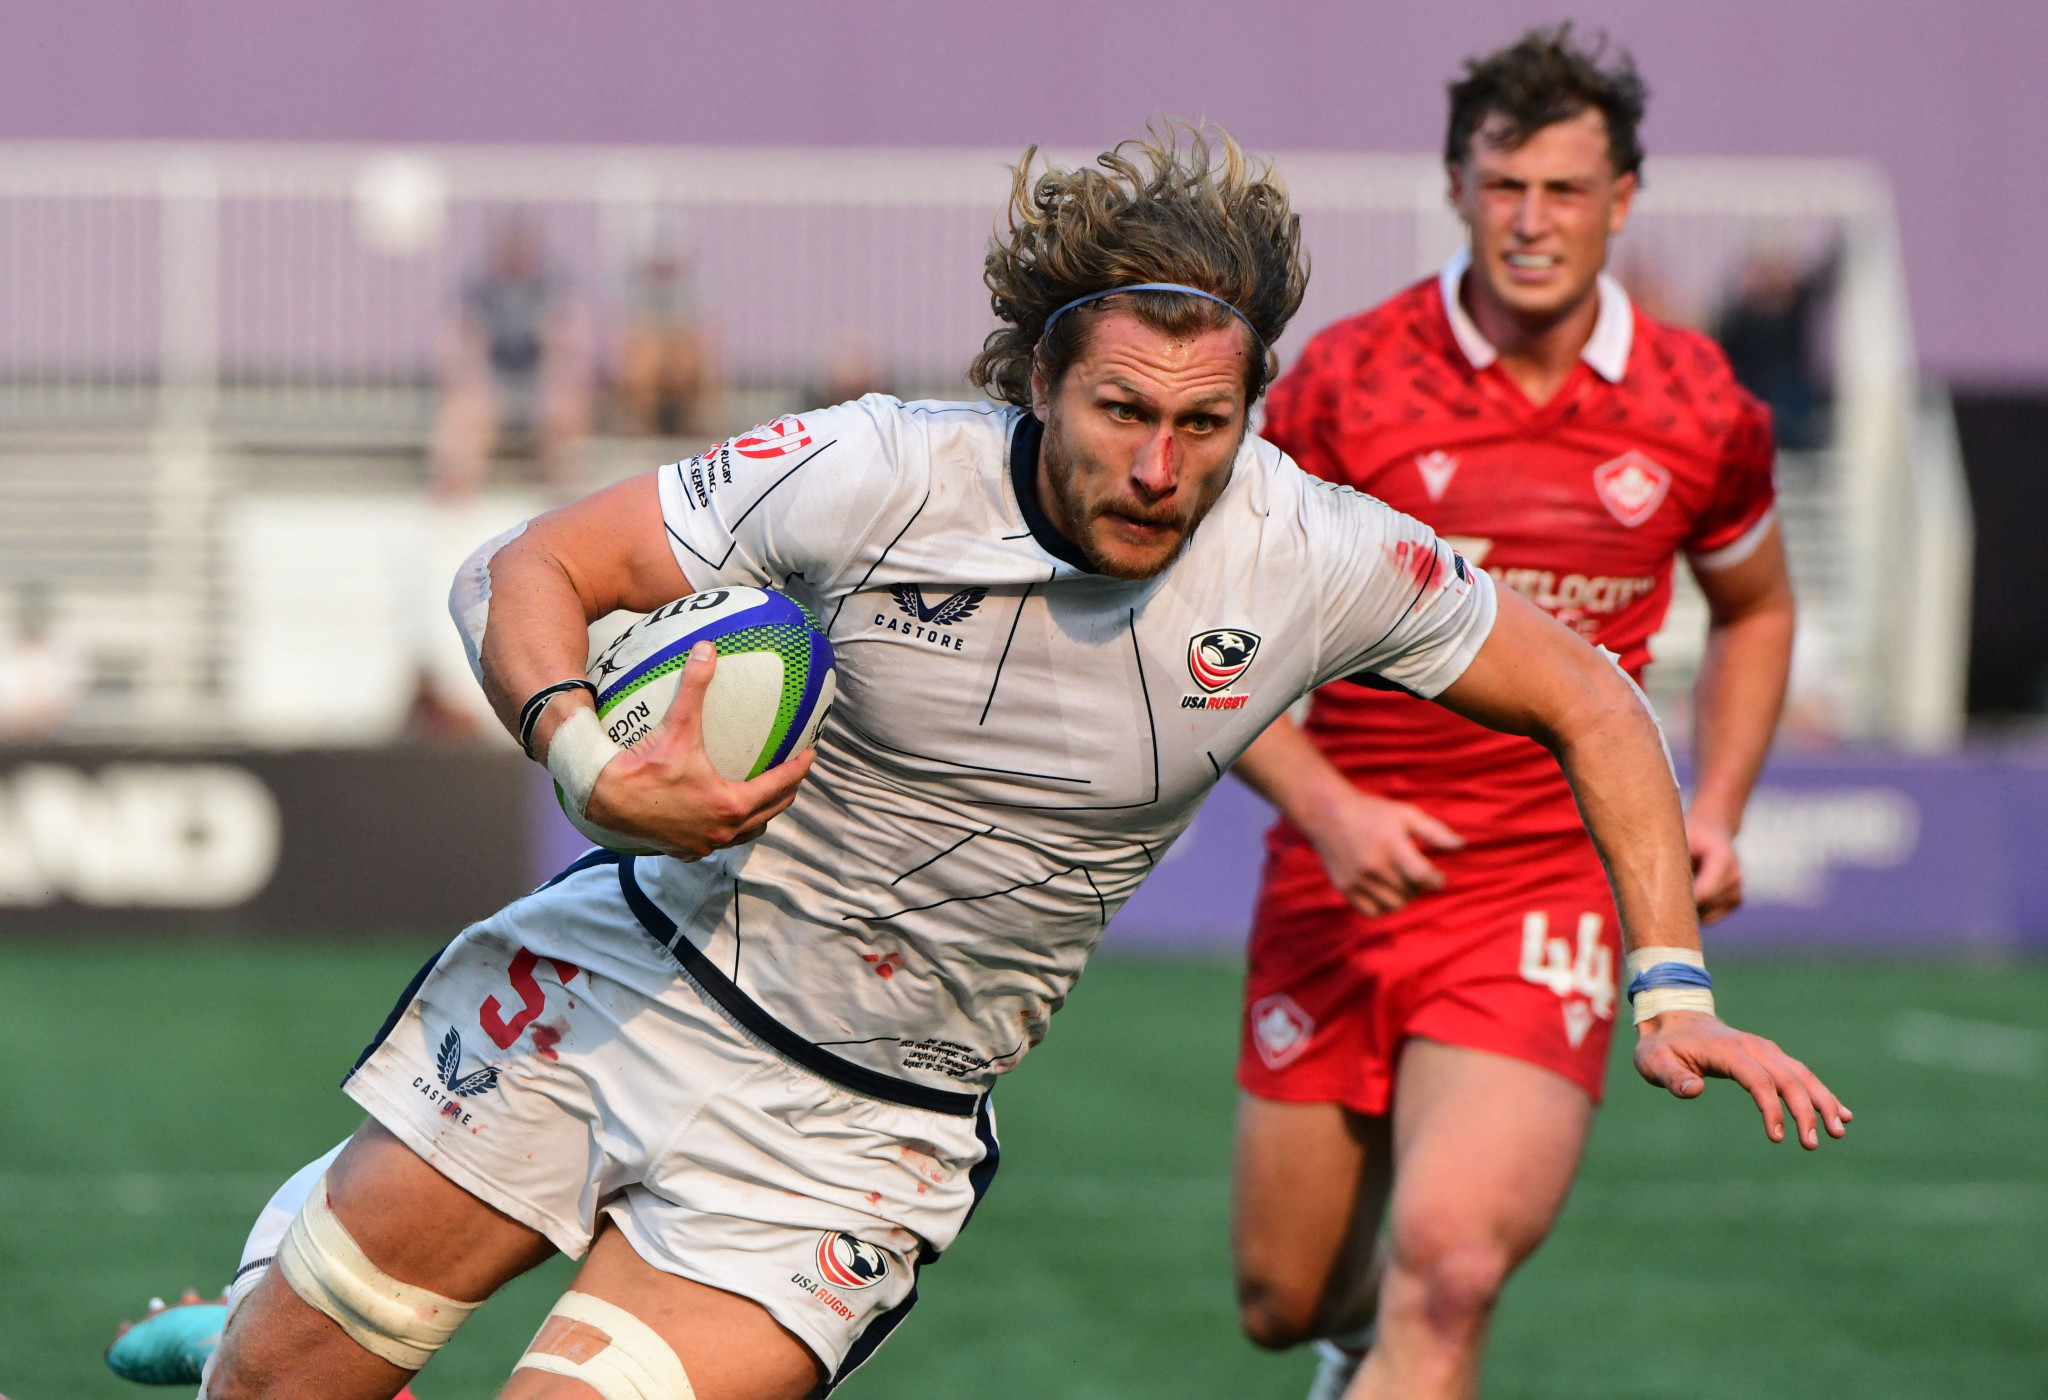 USA Rugby is preparing for a home Olympic Games in Los Angeles in 2028 ©Getty Images